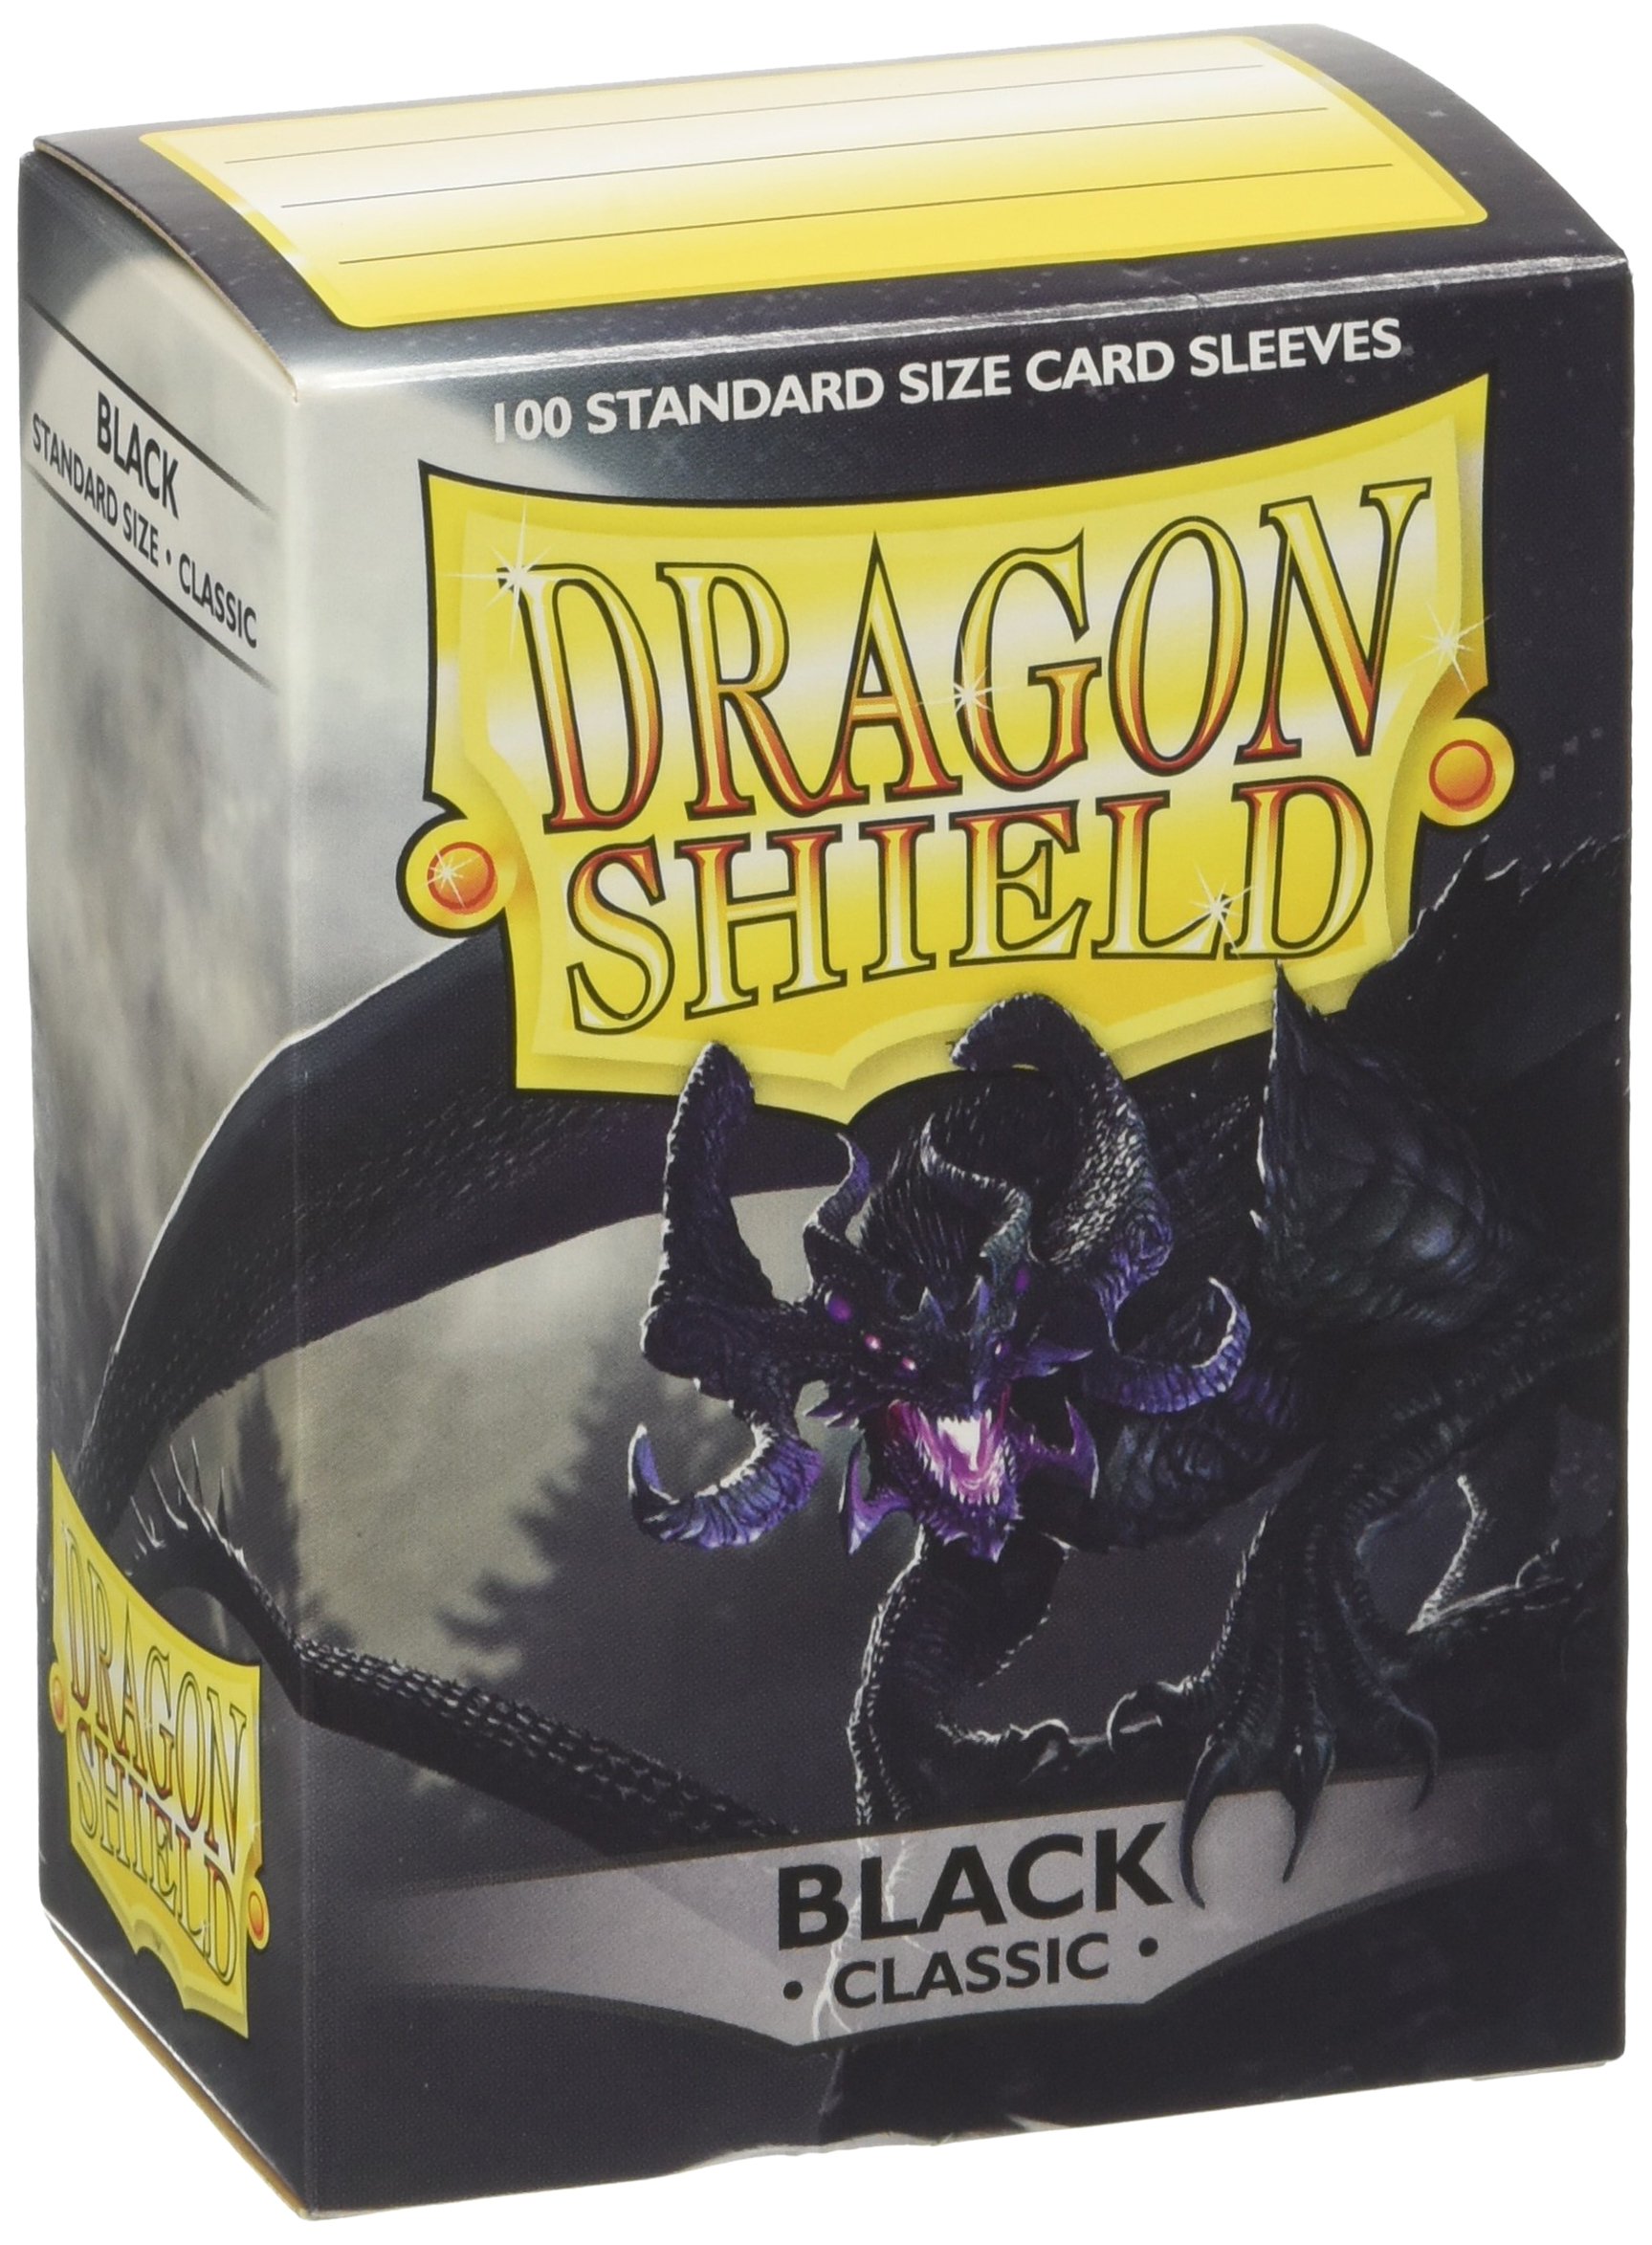 Dragon Shield Standard Size- Classic Black 100 CT - MTG card sleeves are Smooth & Tough - Compatible with Pokemon, Yugioh, & Mag